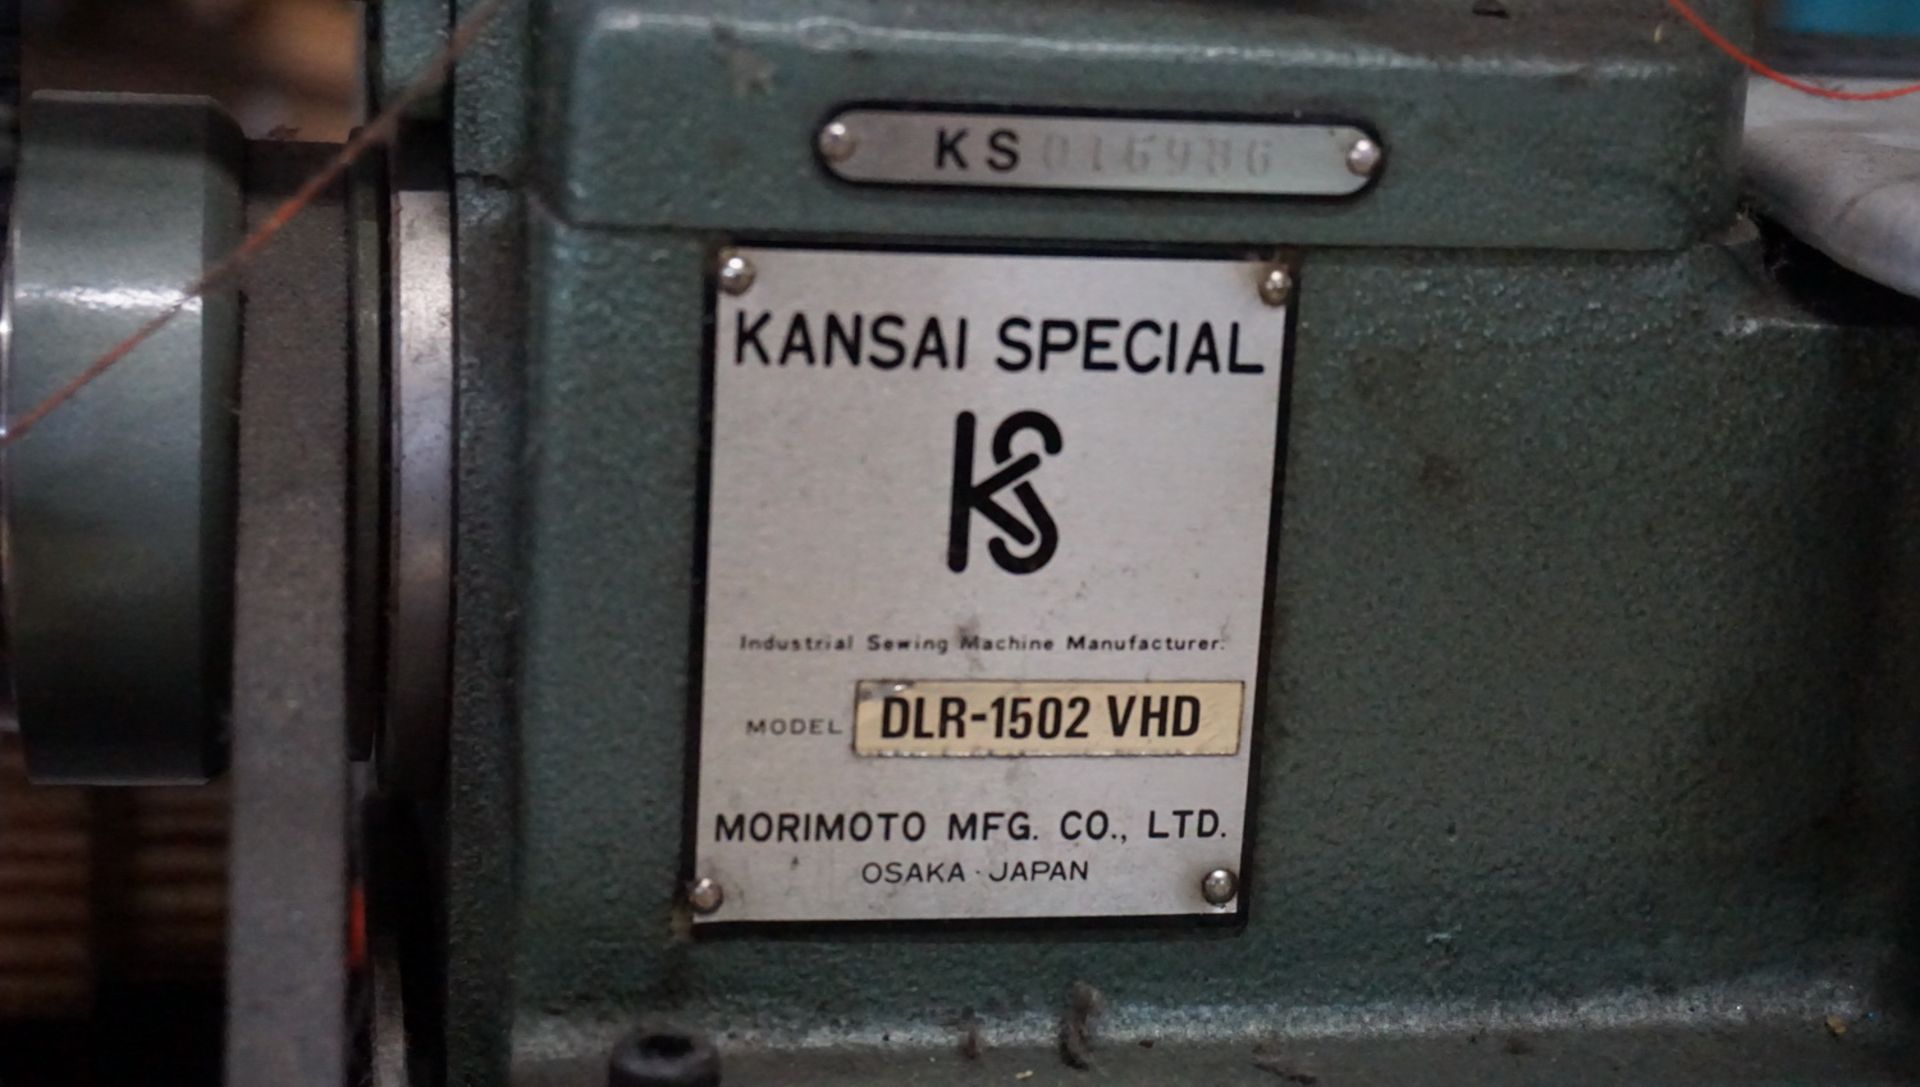 KANSAI DLR-1502VHD 2-NEEDLE FLATBED COVERSTITCH - Image 5 of 5